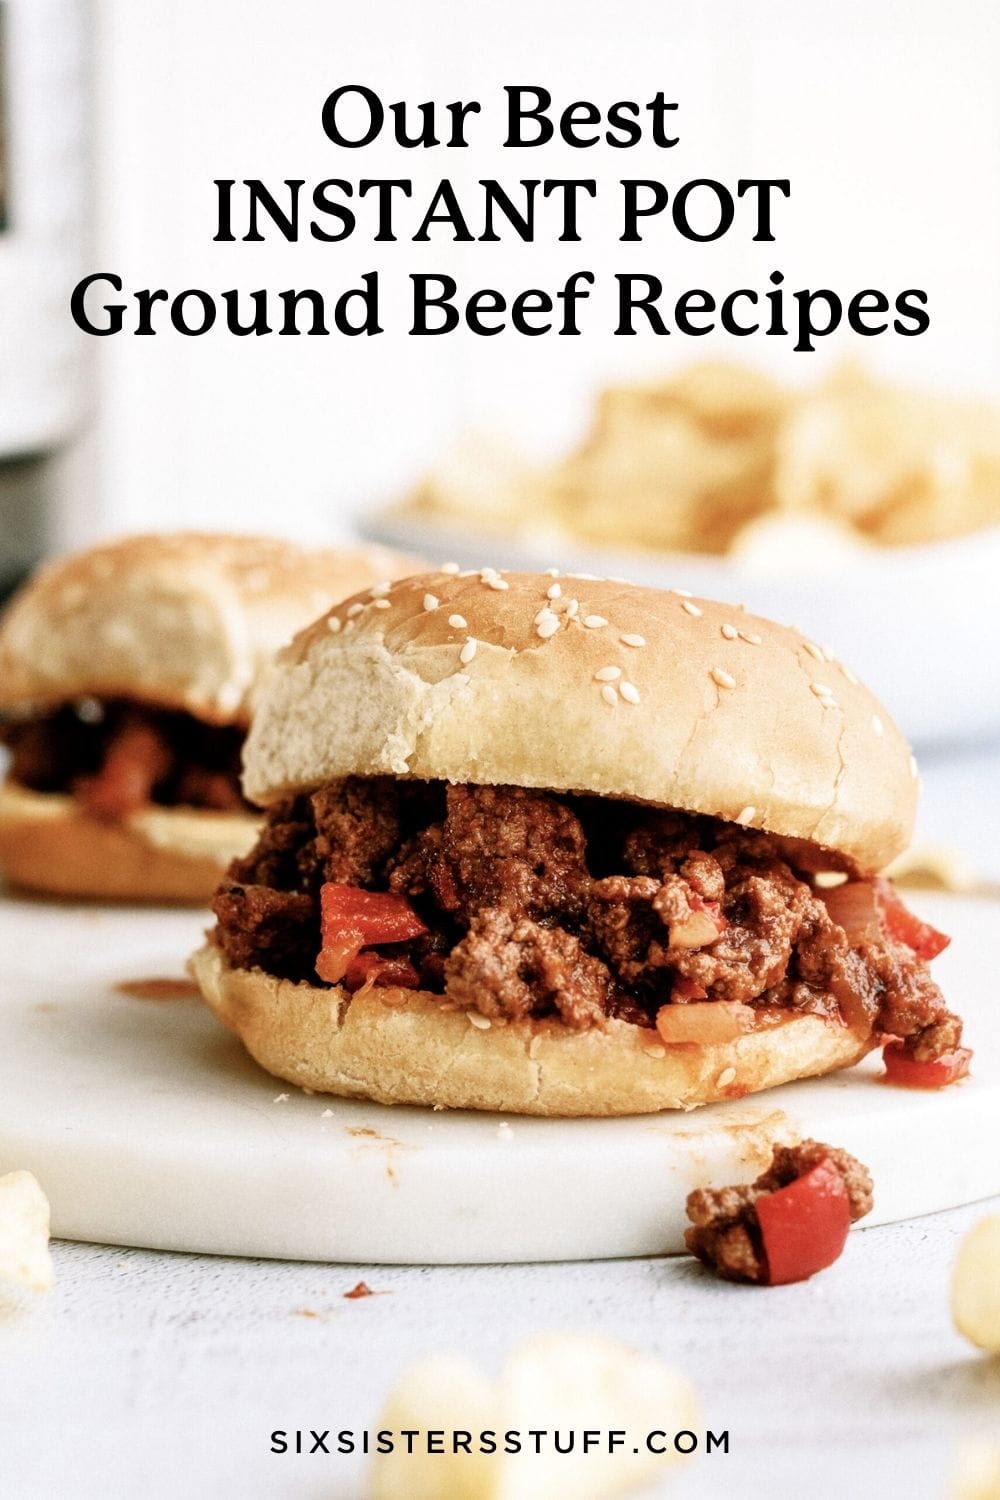 How To Cook Ground Beef In Instant Pot Without Trivet 